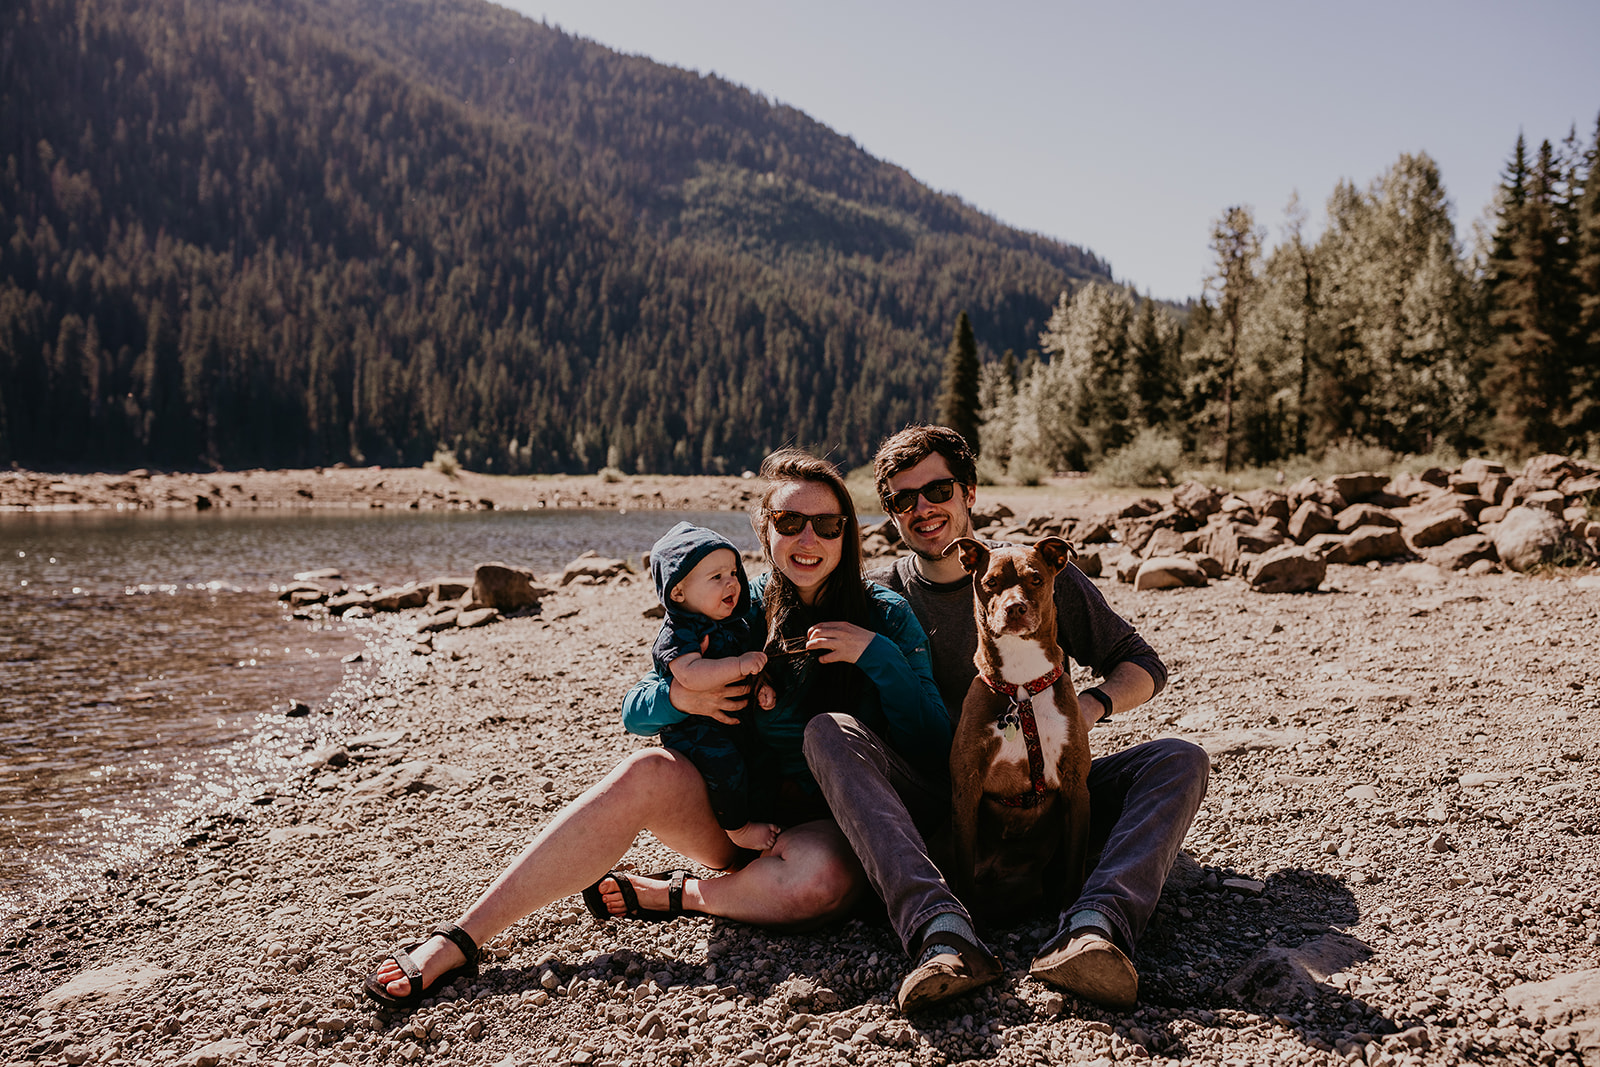 kachess-lake-camping-family-portraits-megan-gallagher-photography_(291_of_335).jpg